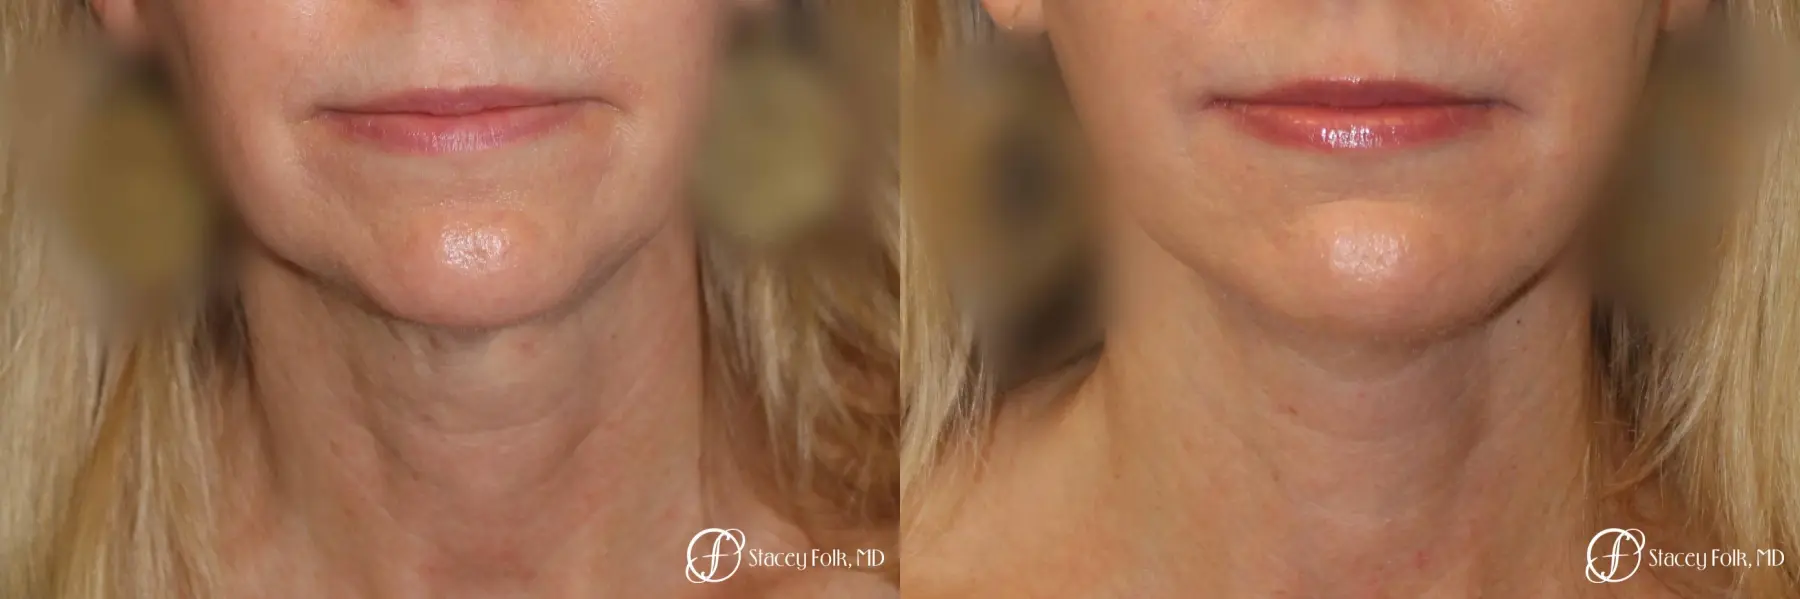 Denver Facial Rejuvenation Face Lift and Fat Injections 7126 - Before and After 3